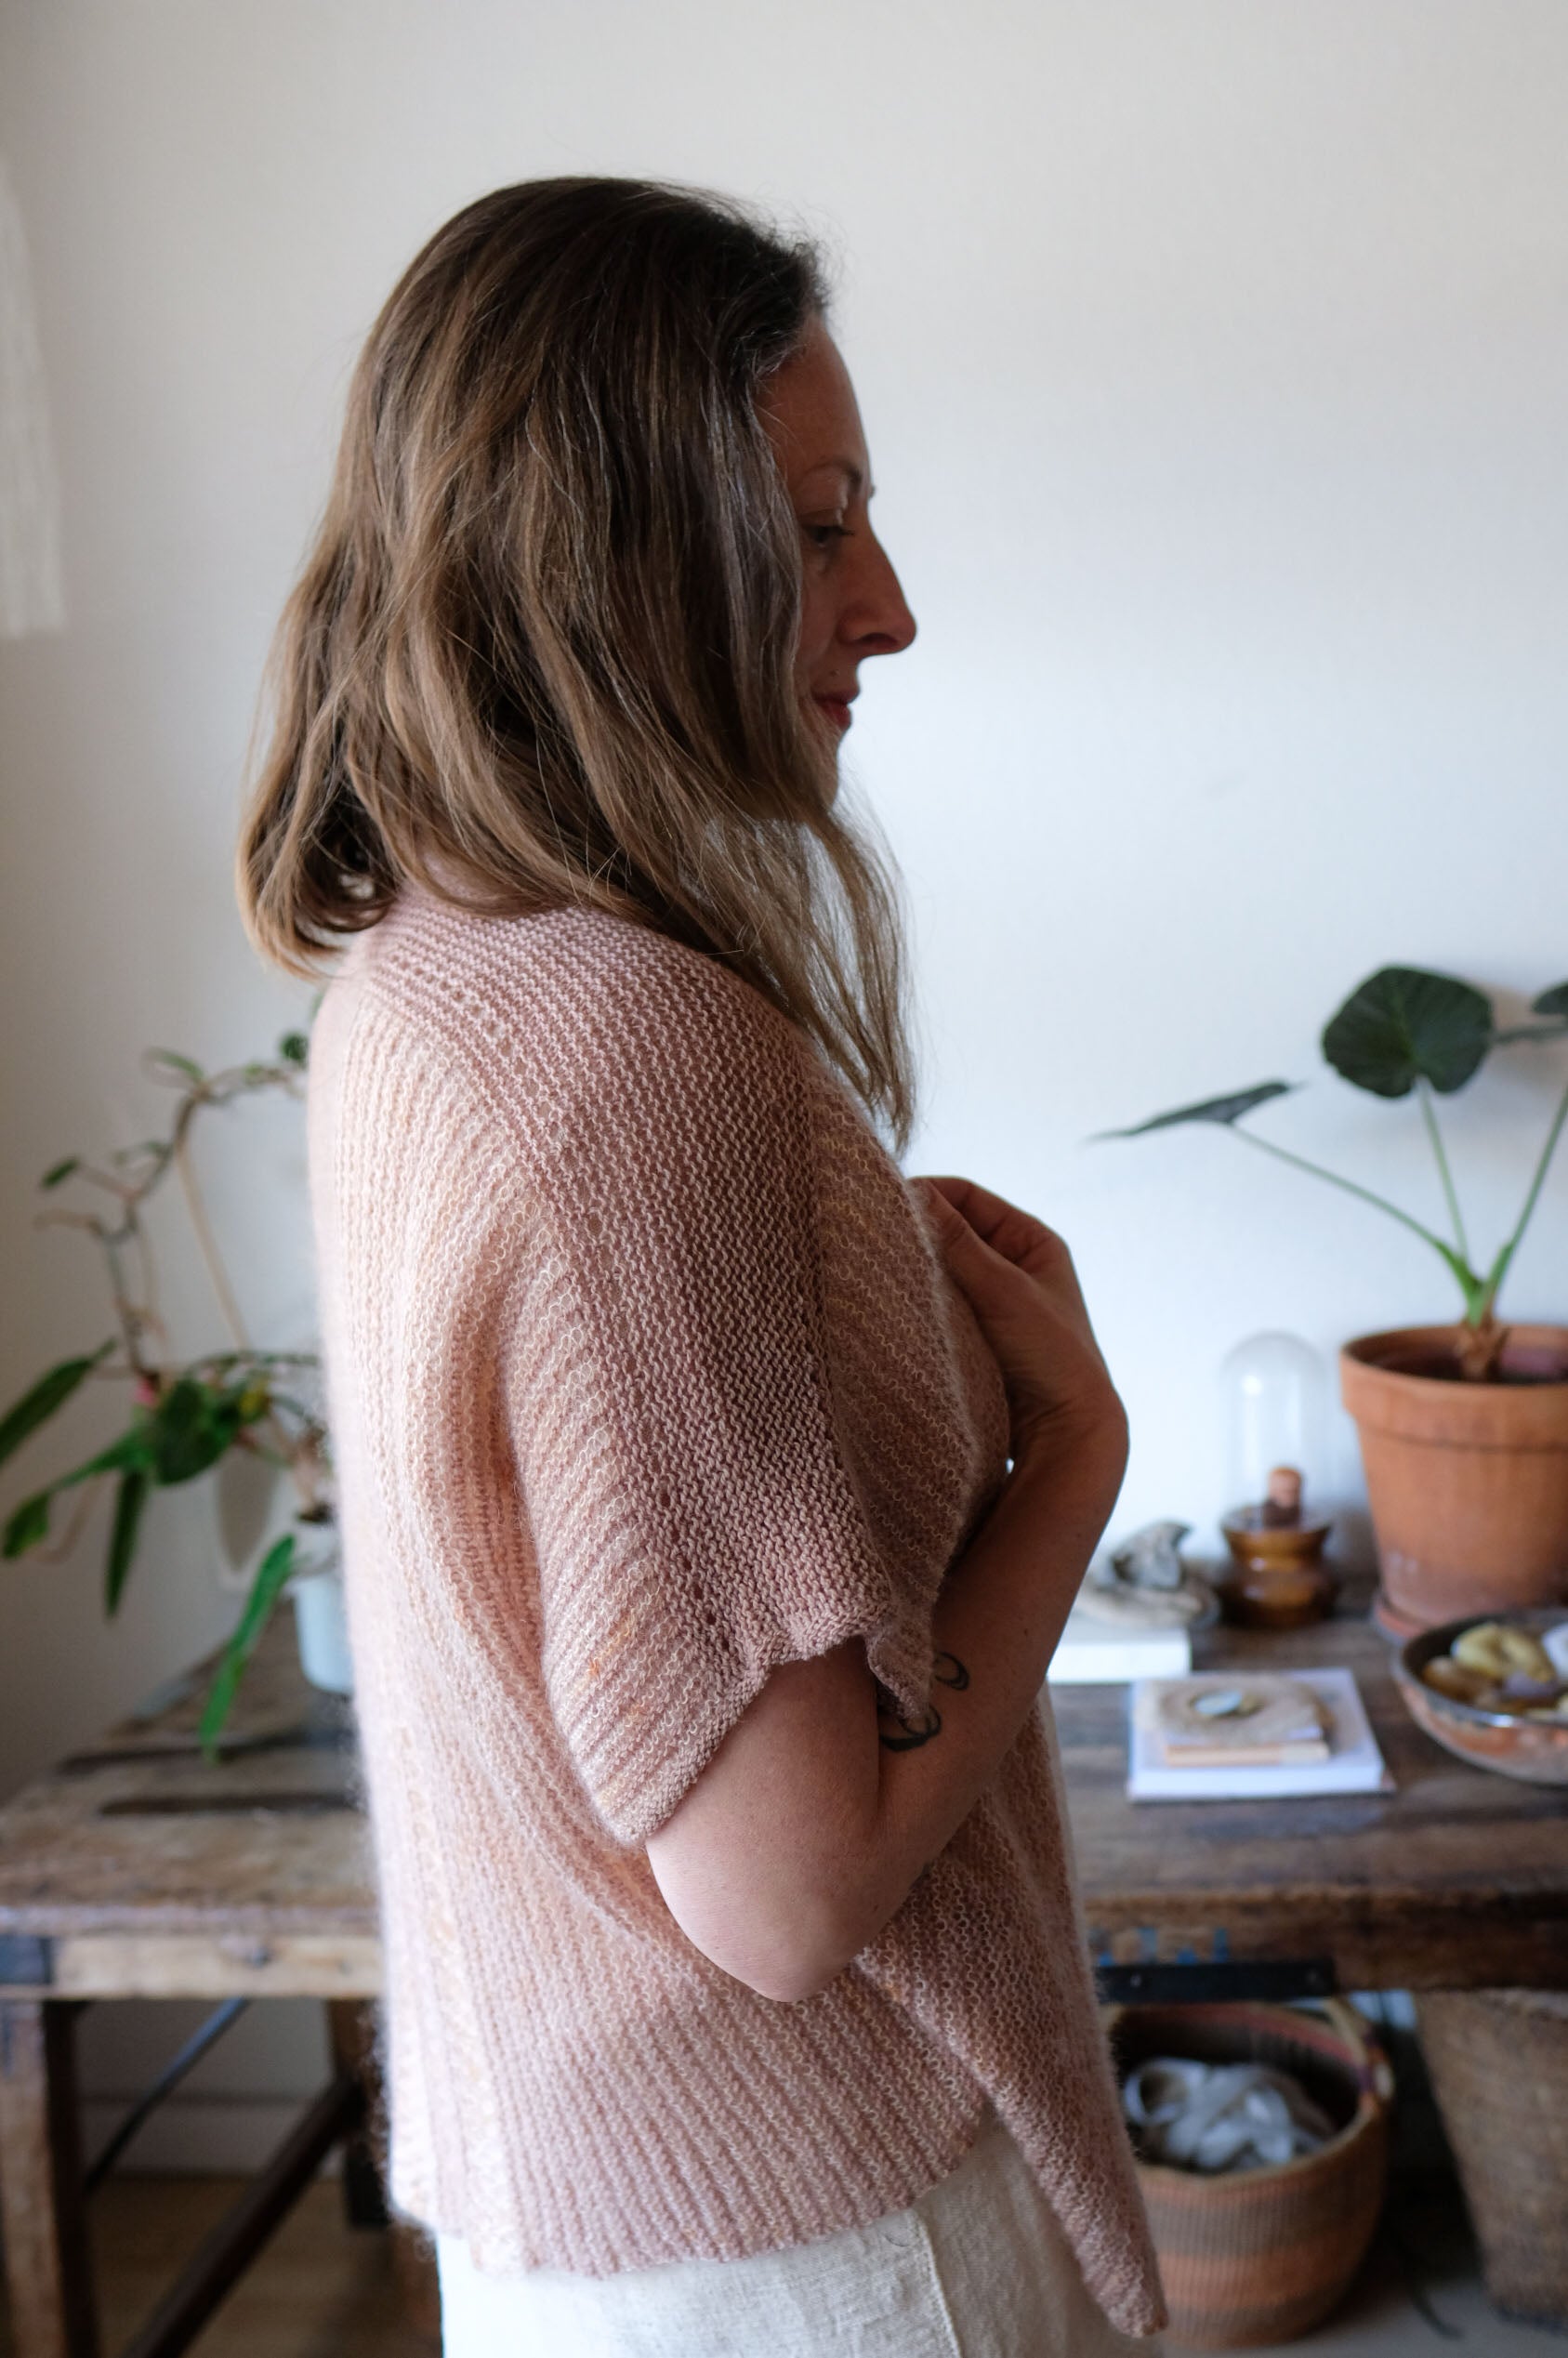 AVFKW x Romi Hill - Swoop Softly Sweater Kit - Dye-to-Order